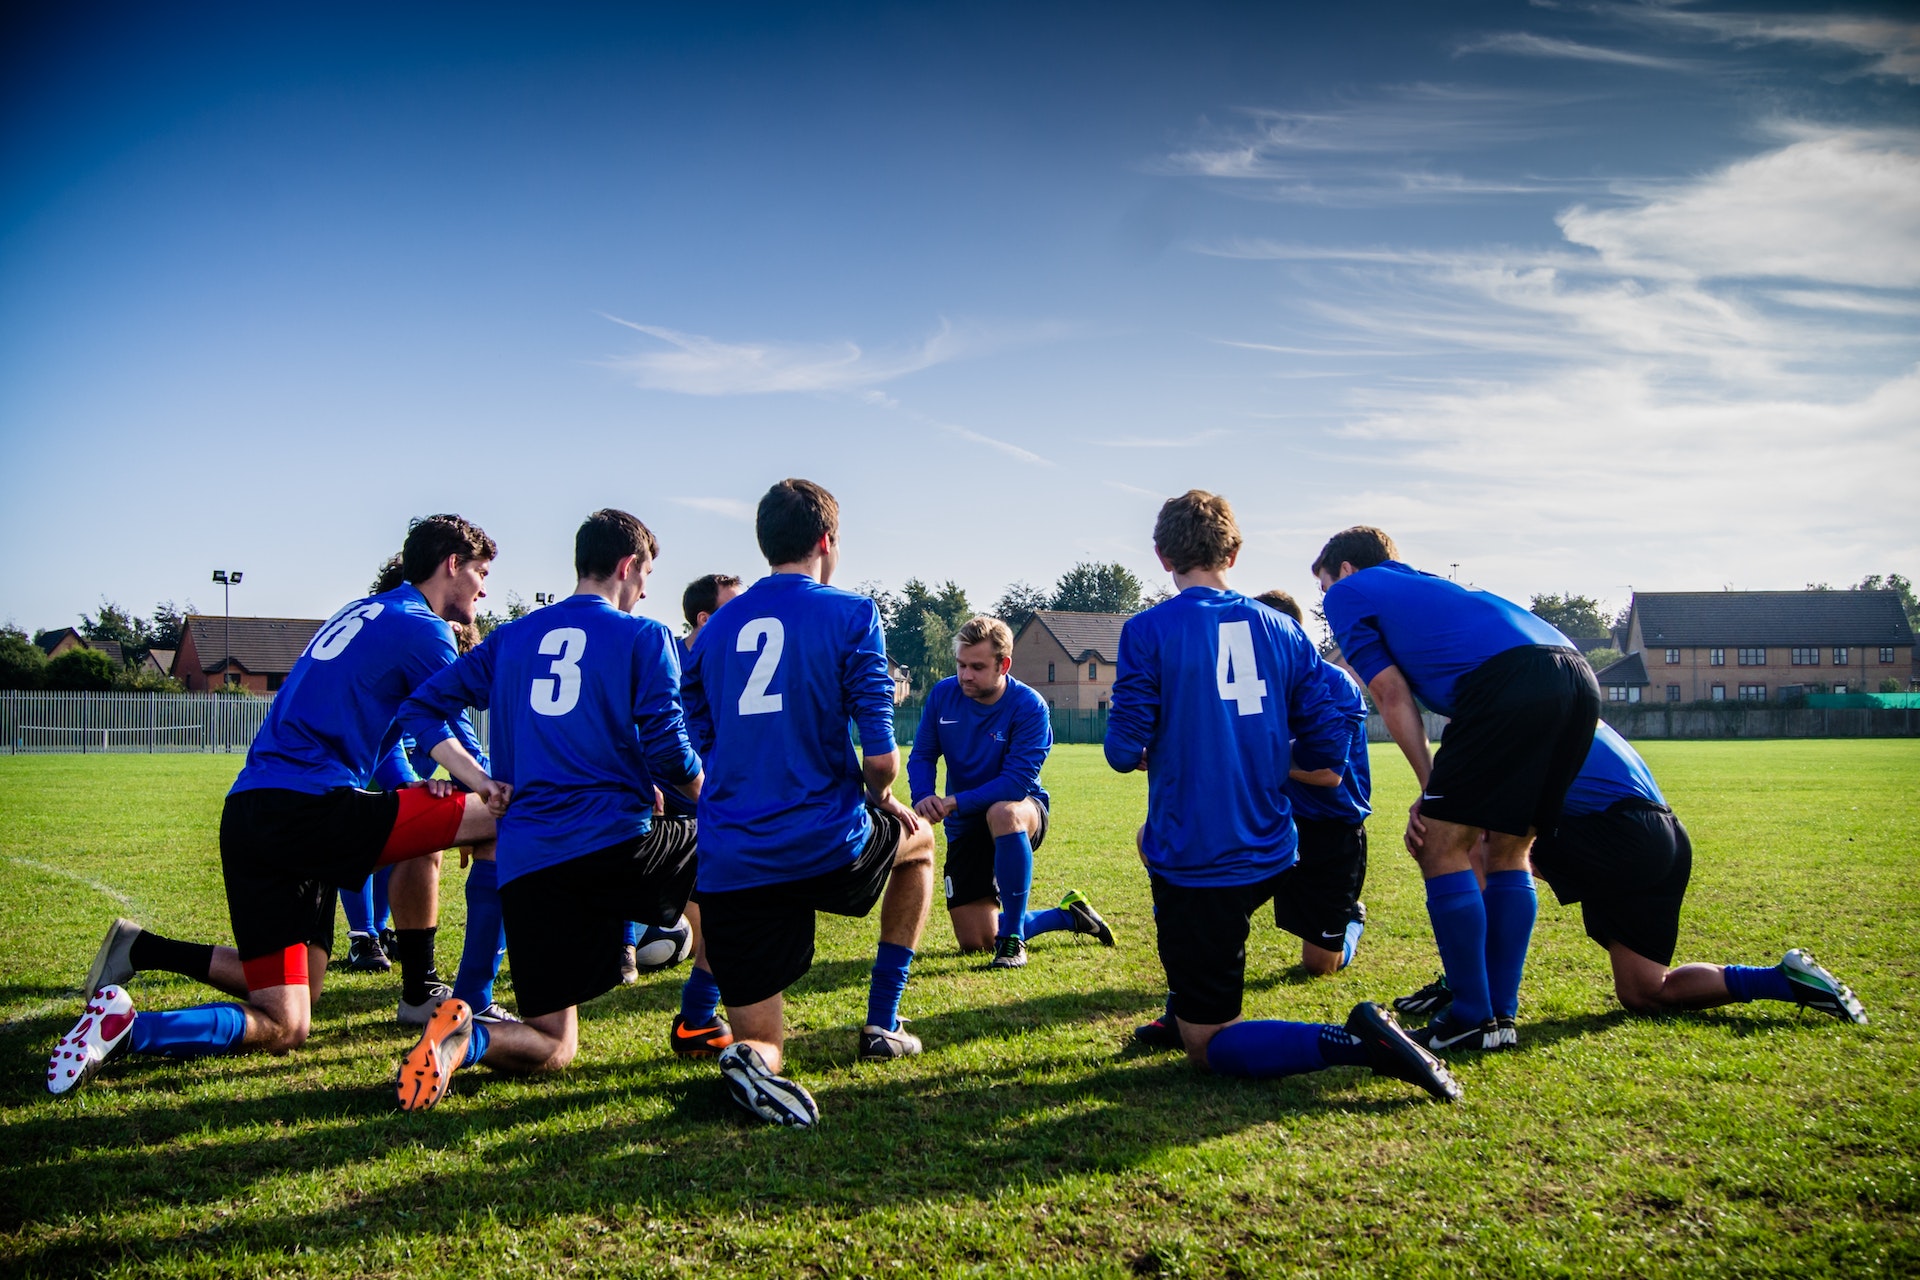 Amateur football team in a meeting before a match